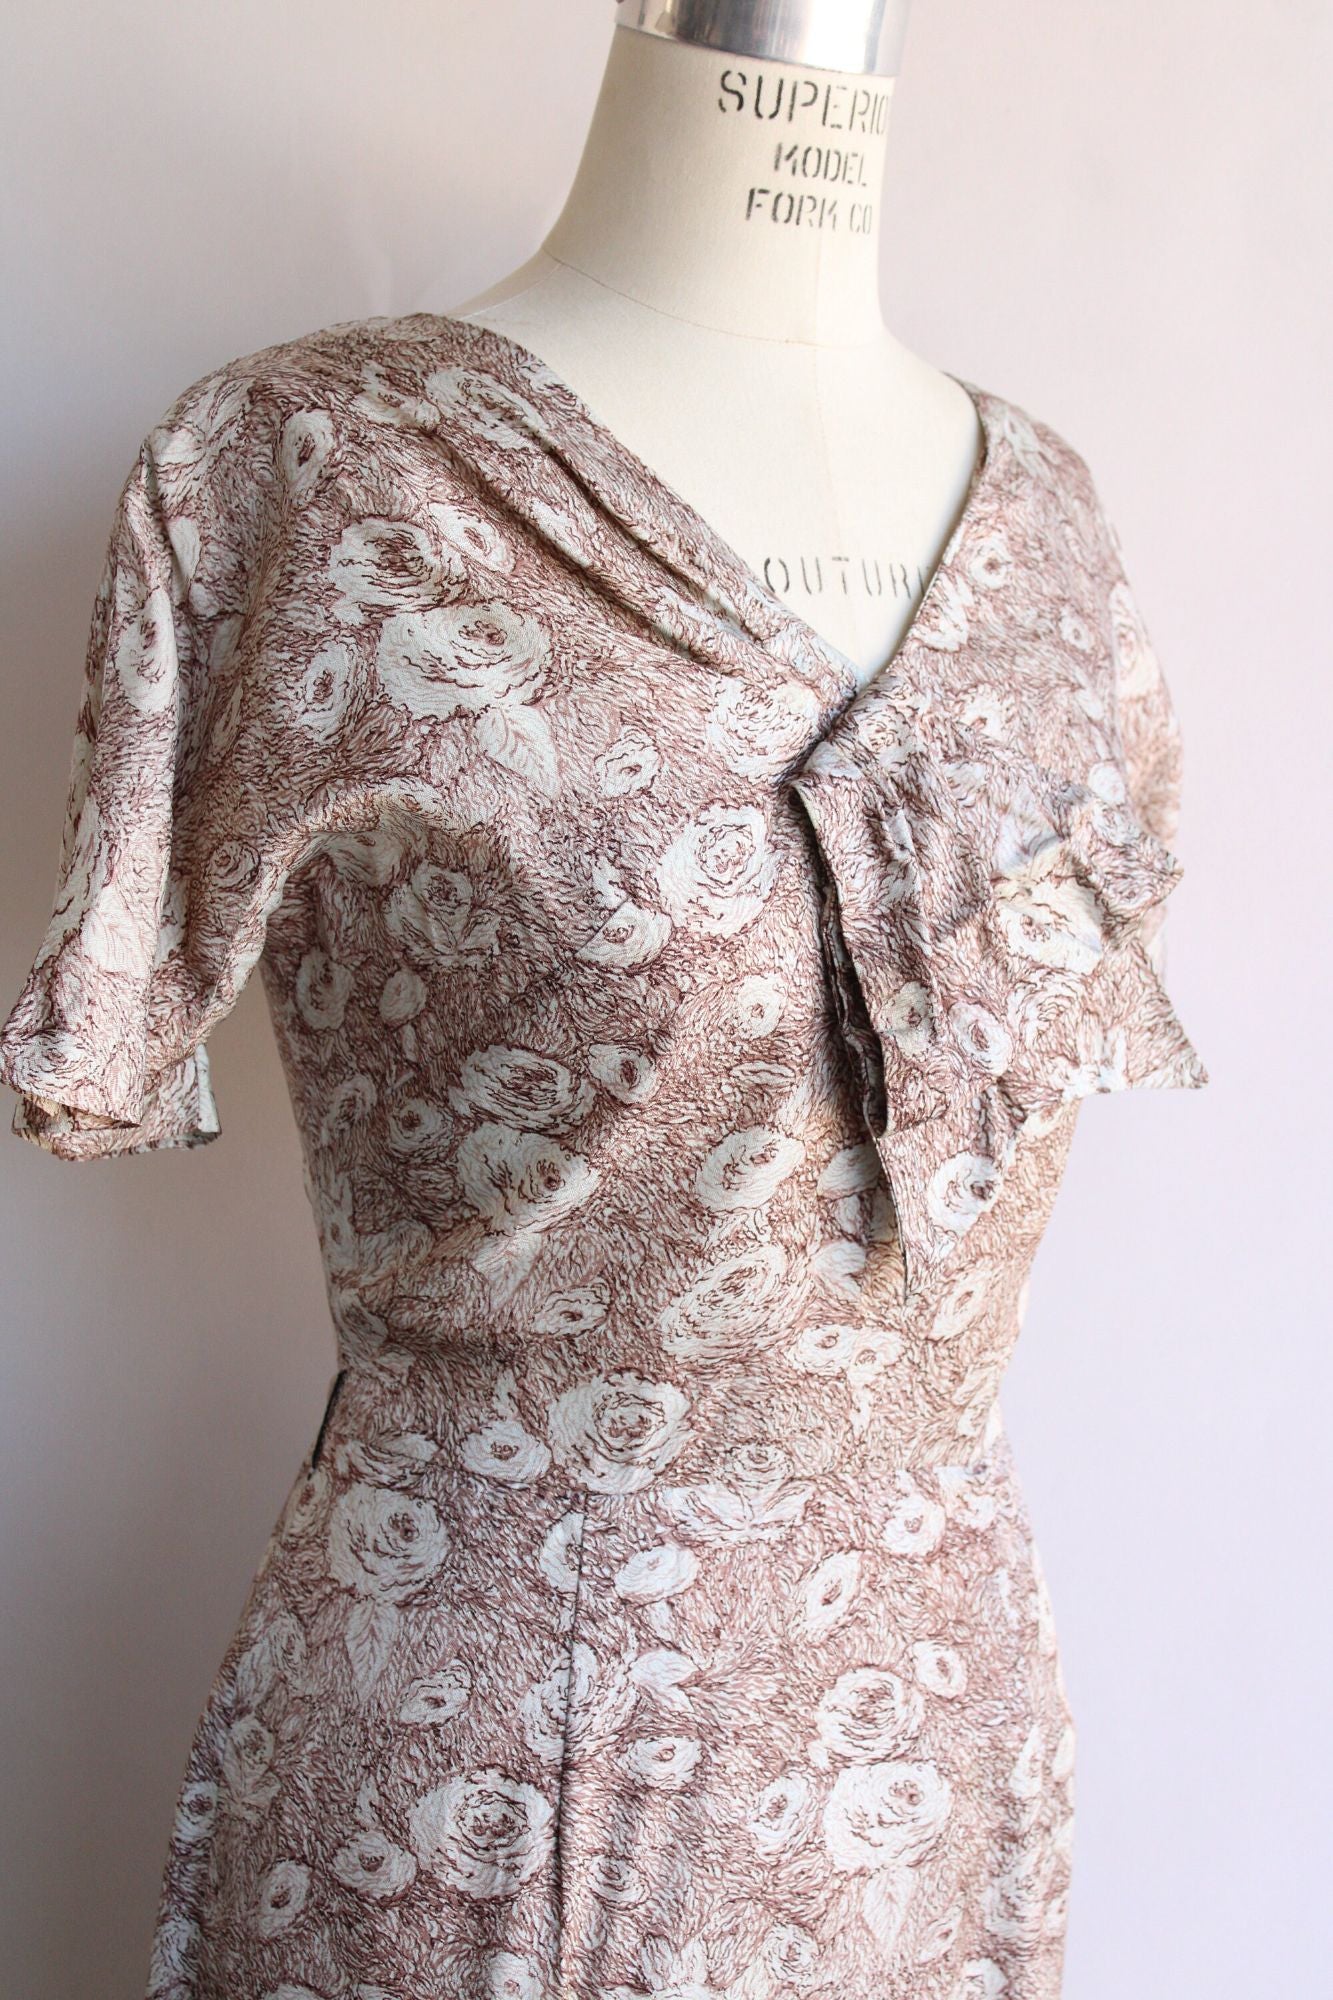 Vintage 1940s Kay Carter Brown and Gray Floral Print Rayon Day Dress